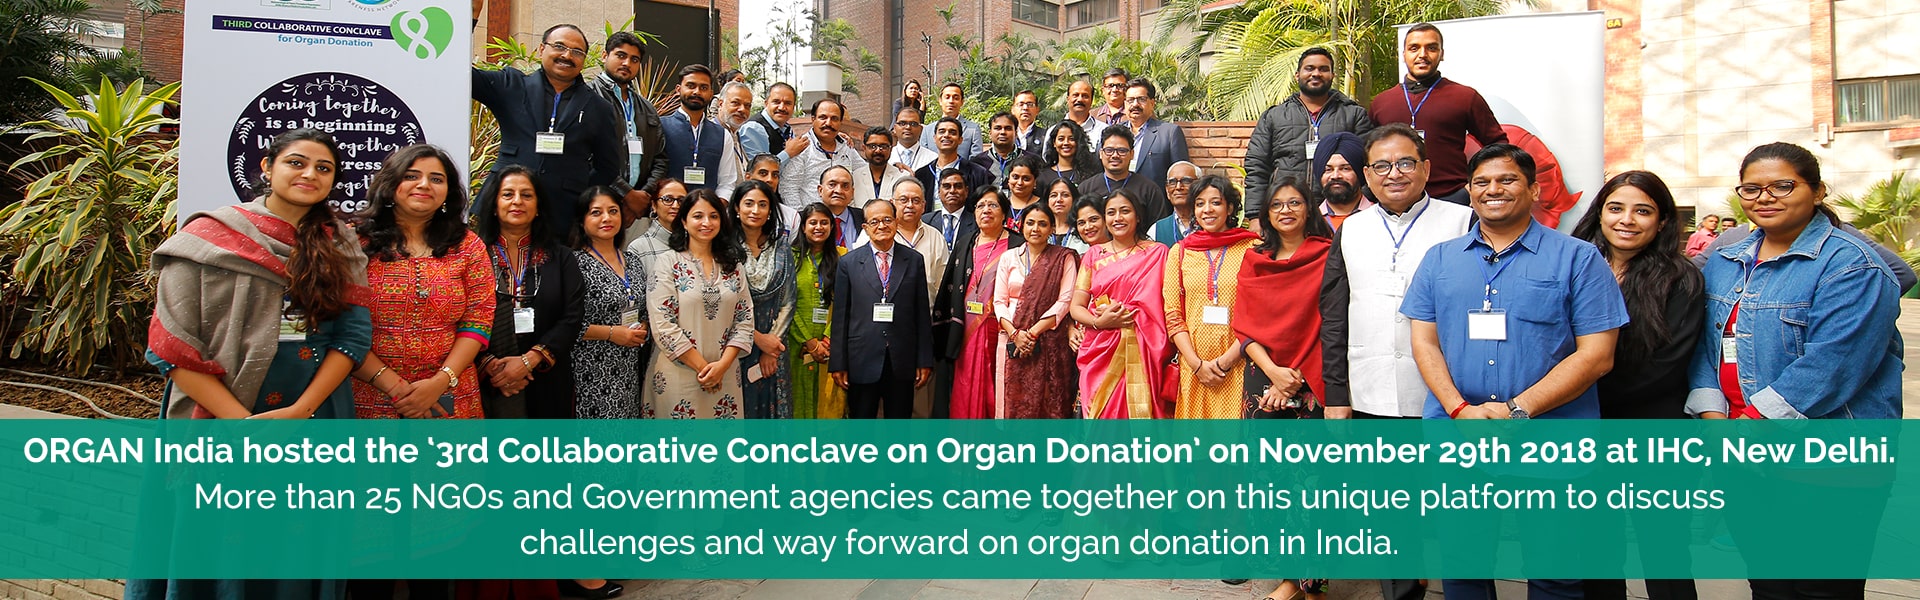 Unique platform to discuss challenges and way forward on organ donation in India